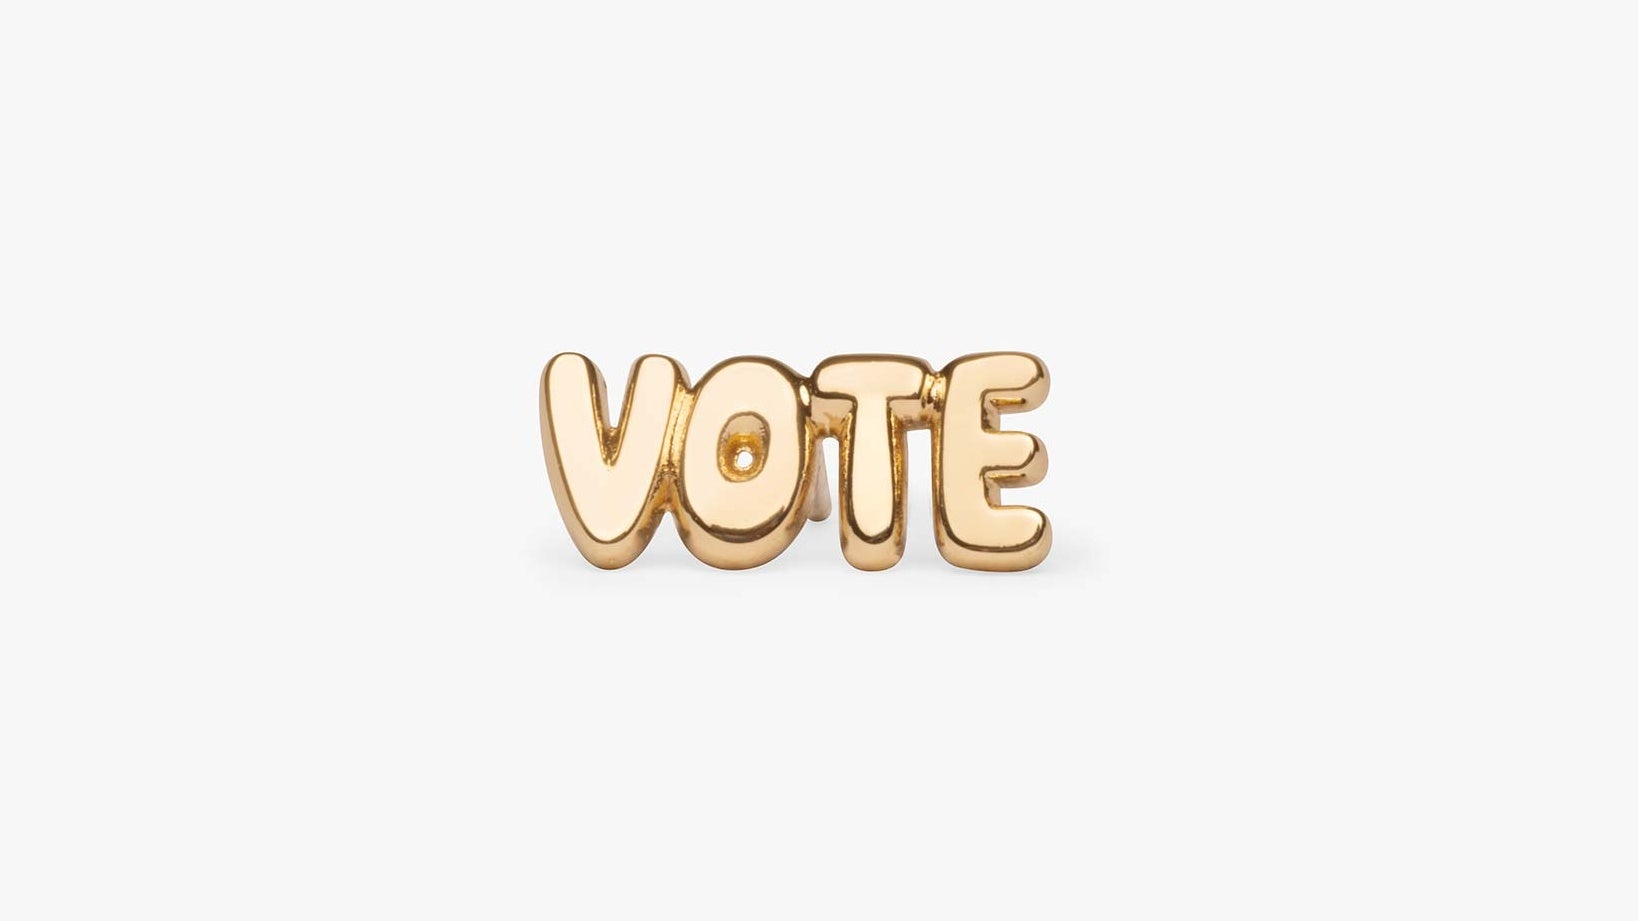 Studs X When We All Vote Partner For Vote Capsule Collection